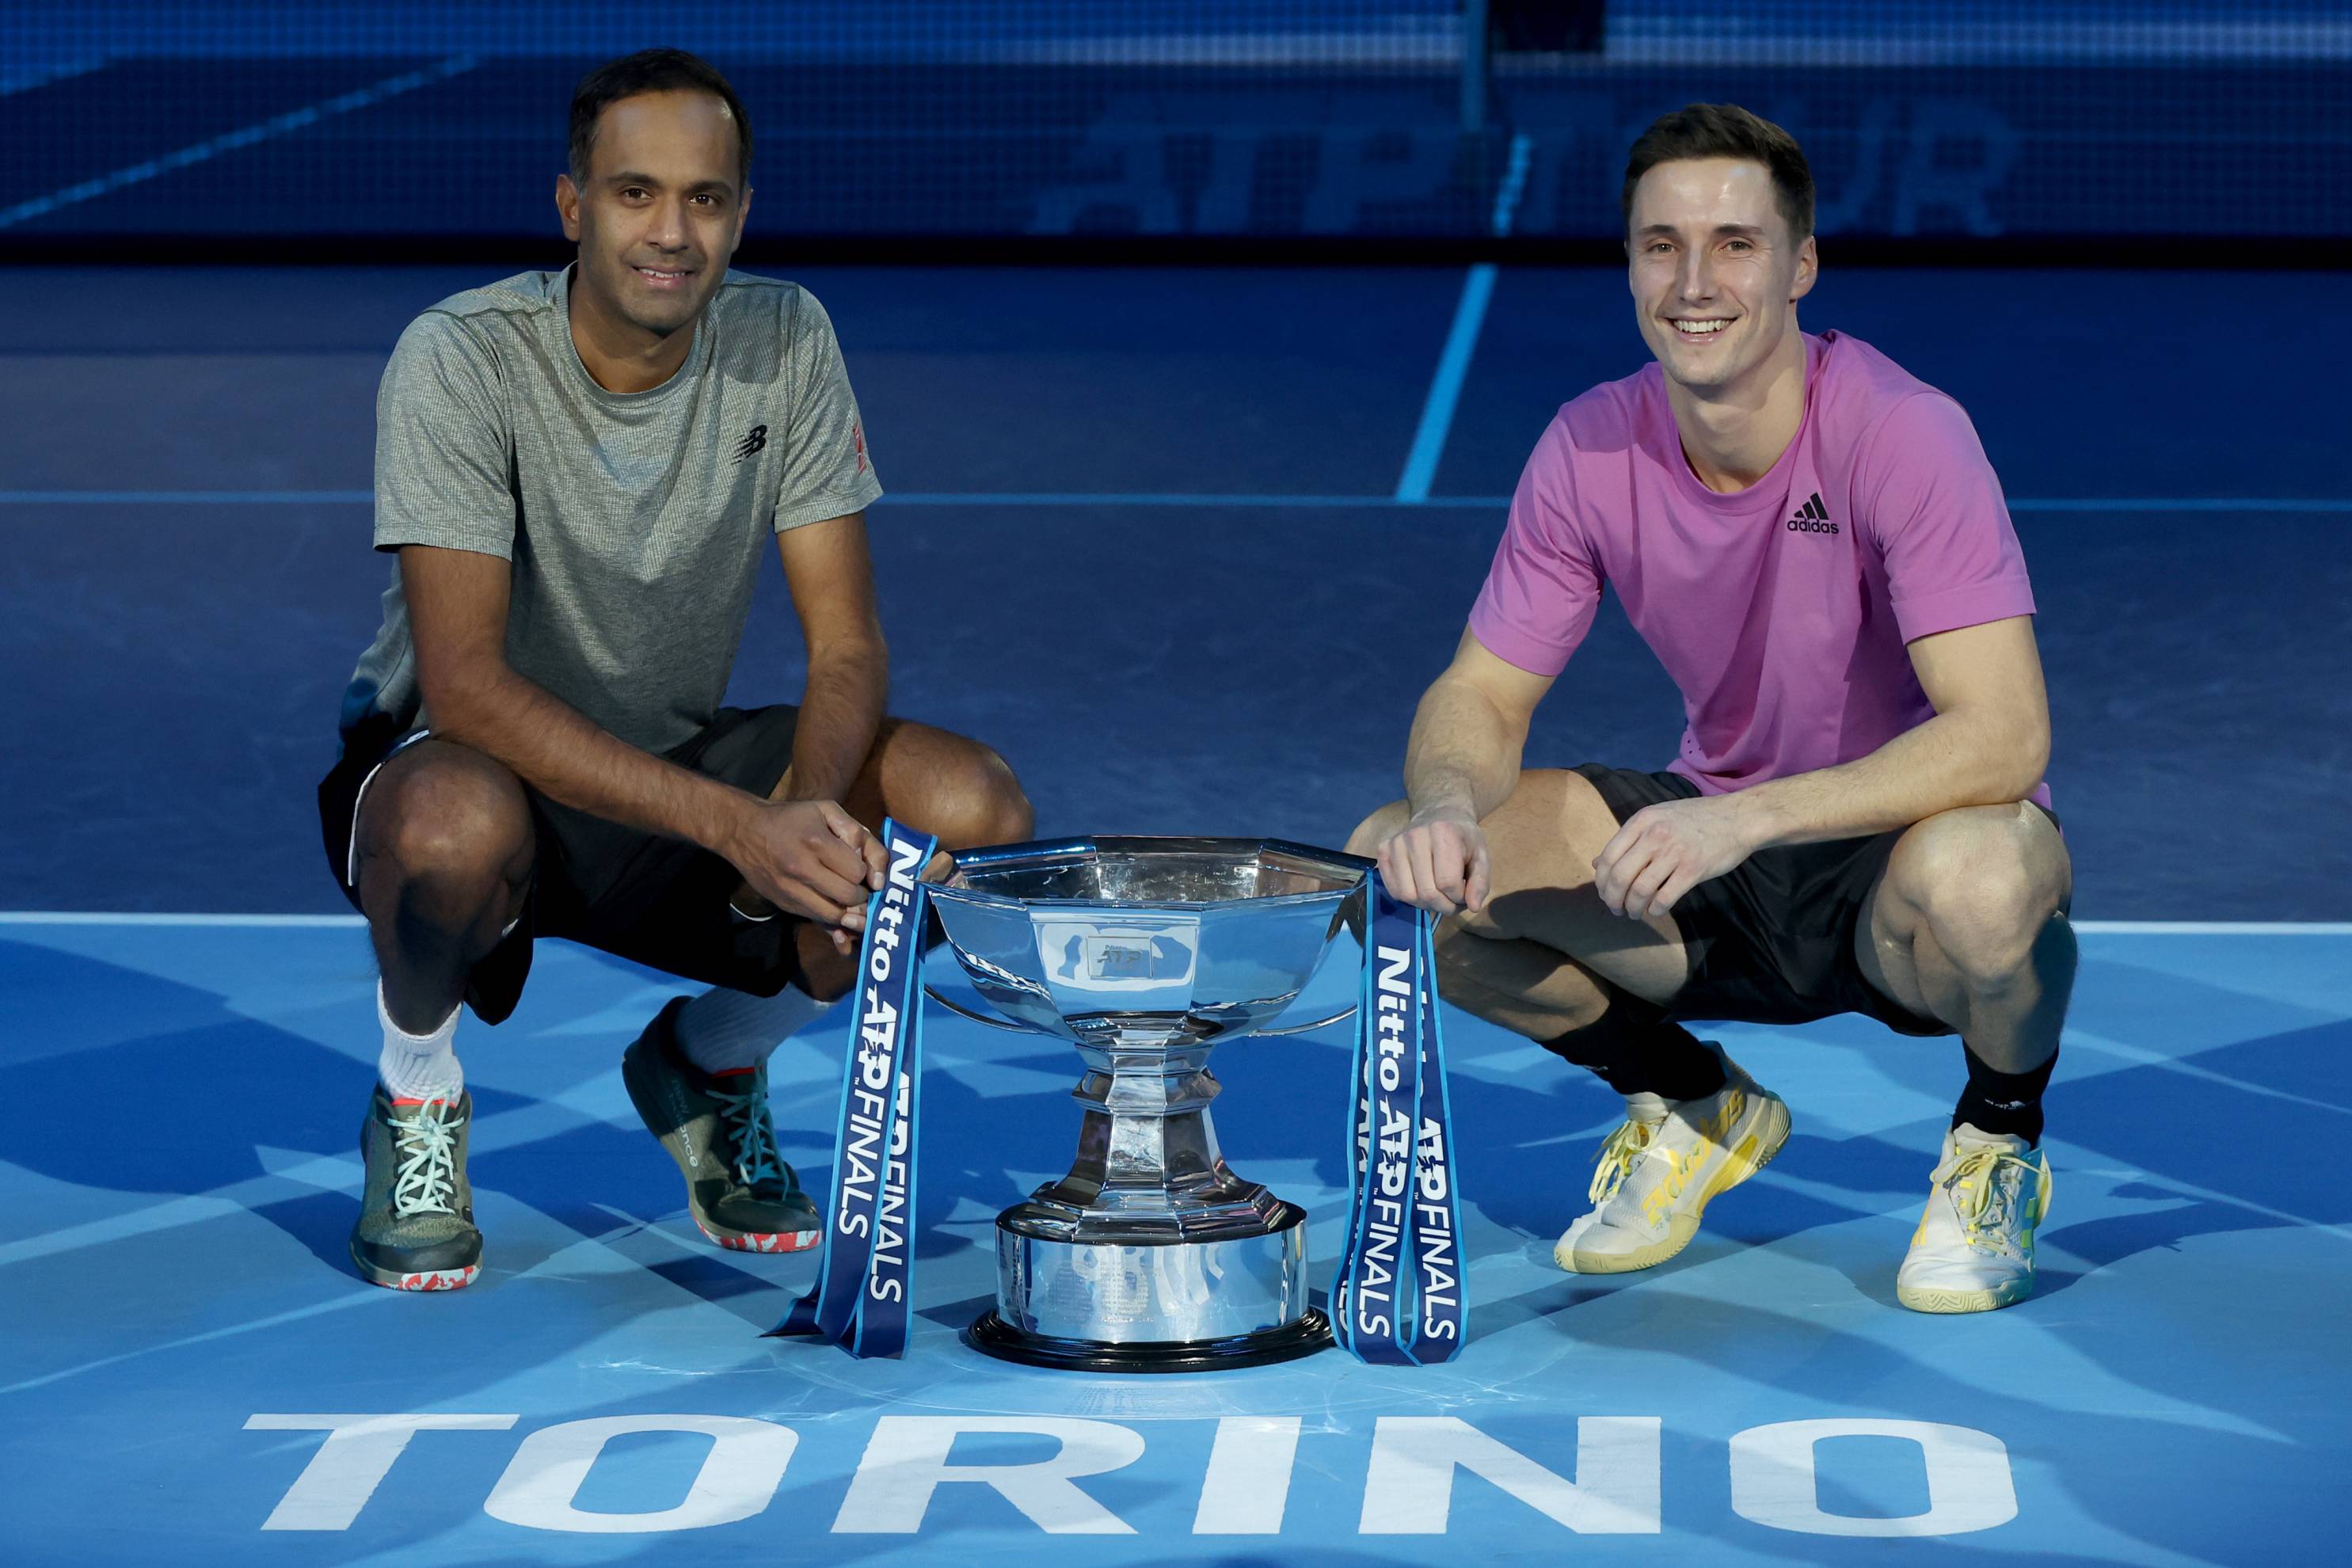 atp tennis finals results today